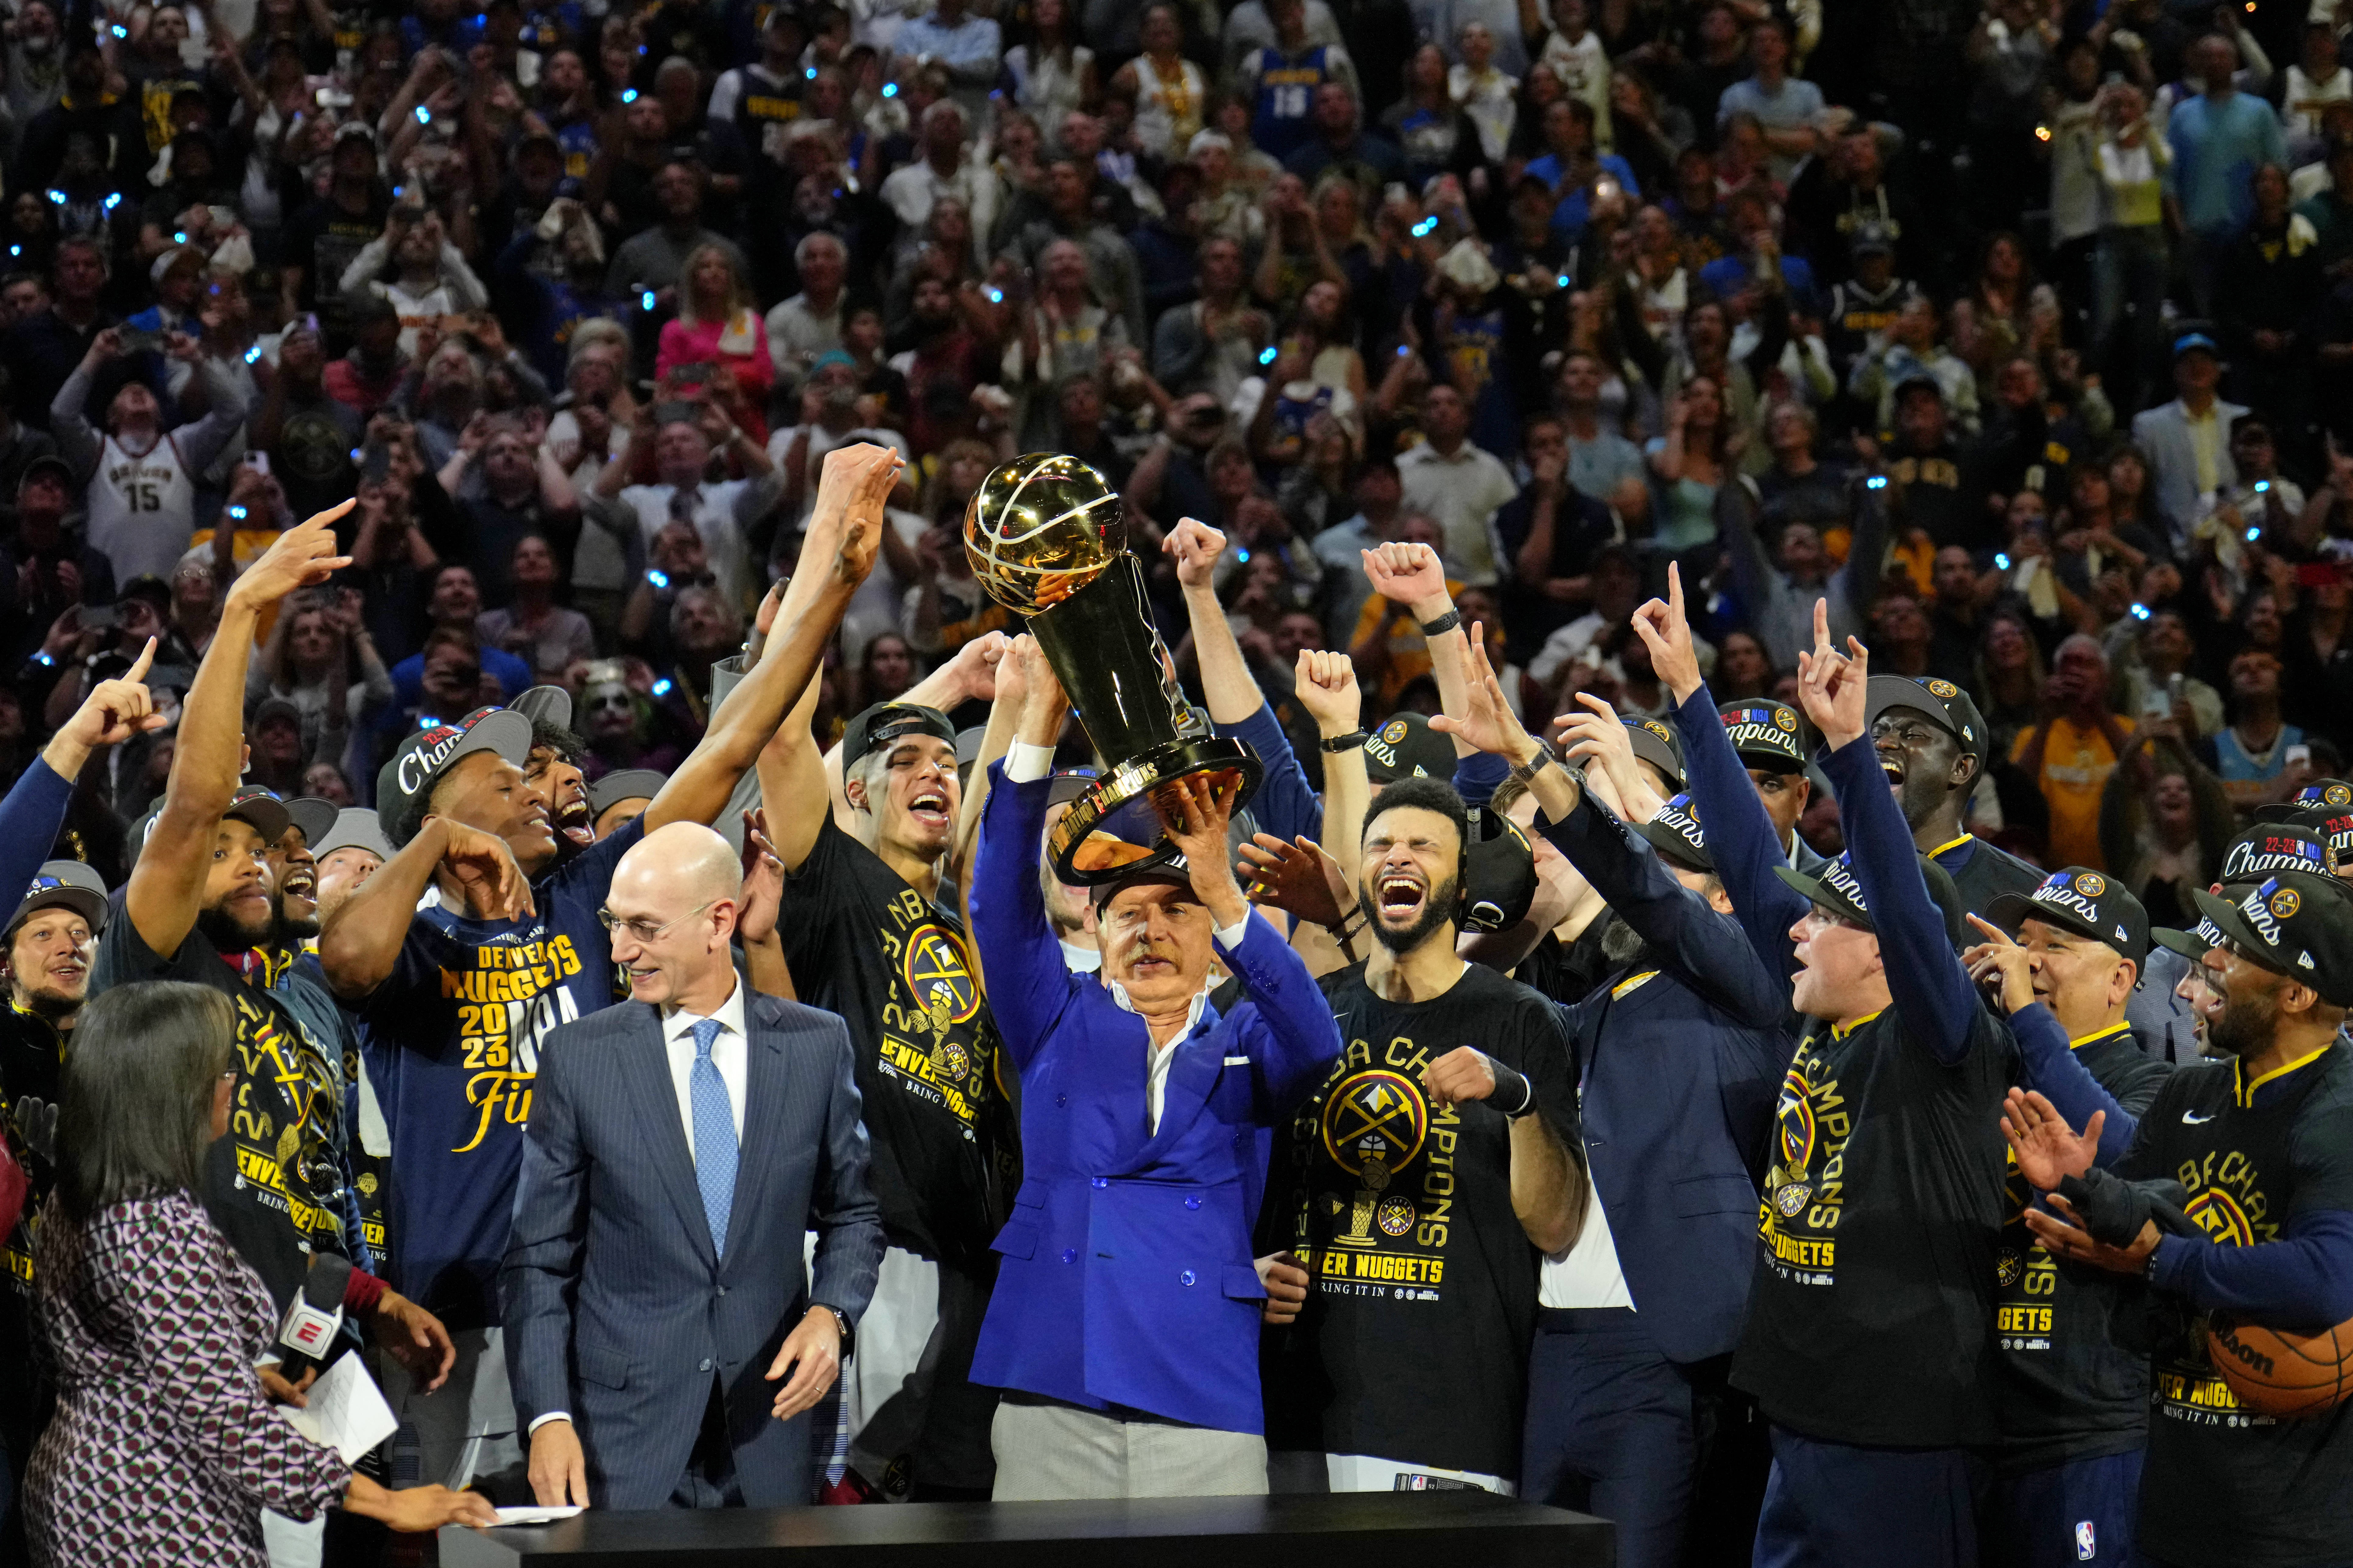 Denver Nuggets defeat the Miami Heat in Game 5 to win first NBA title